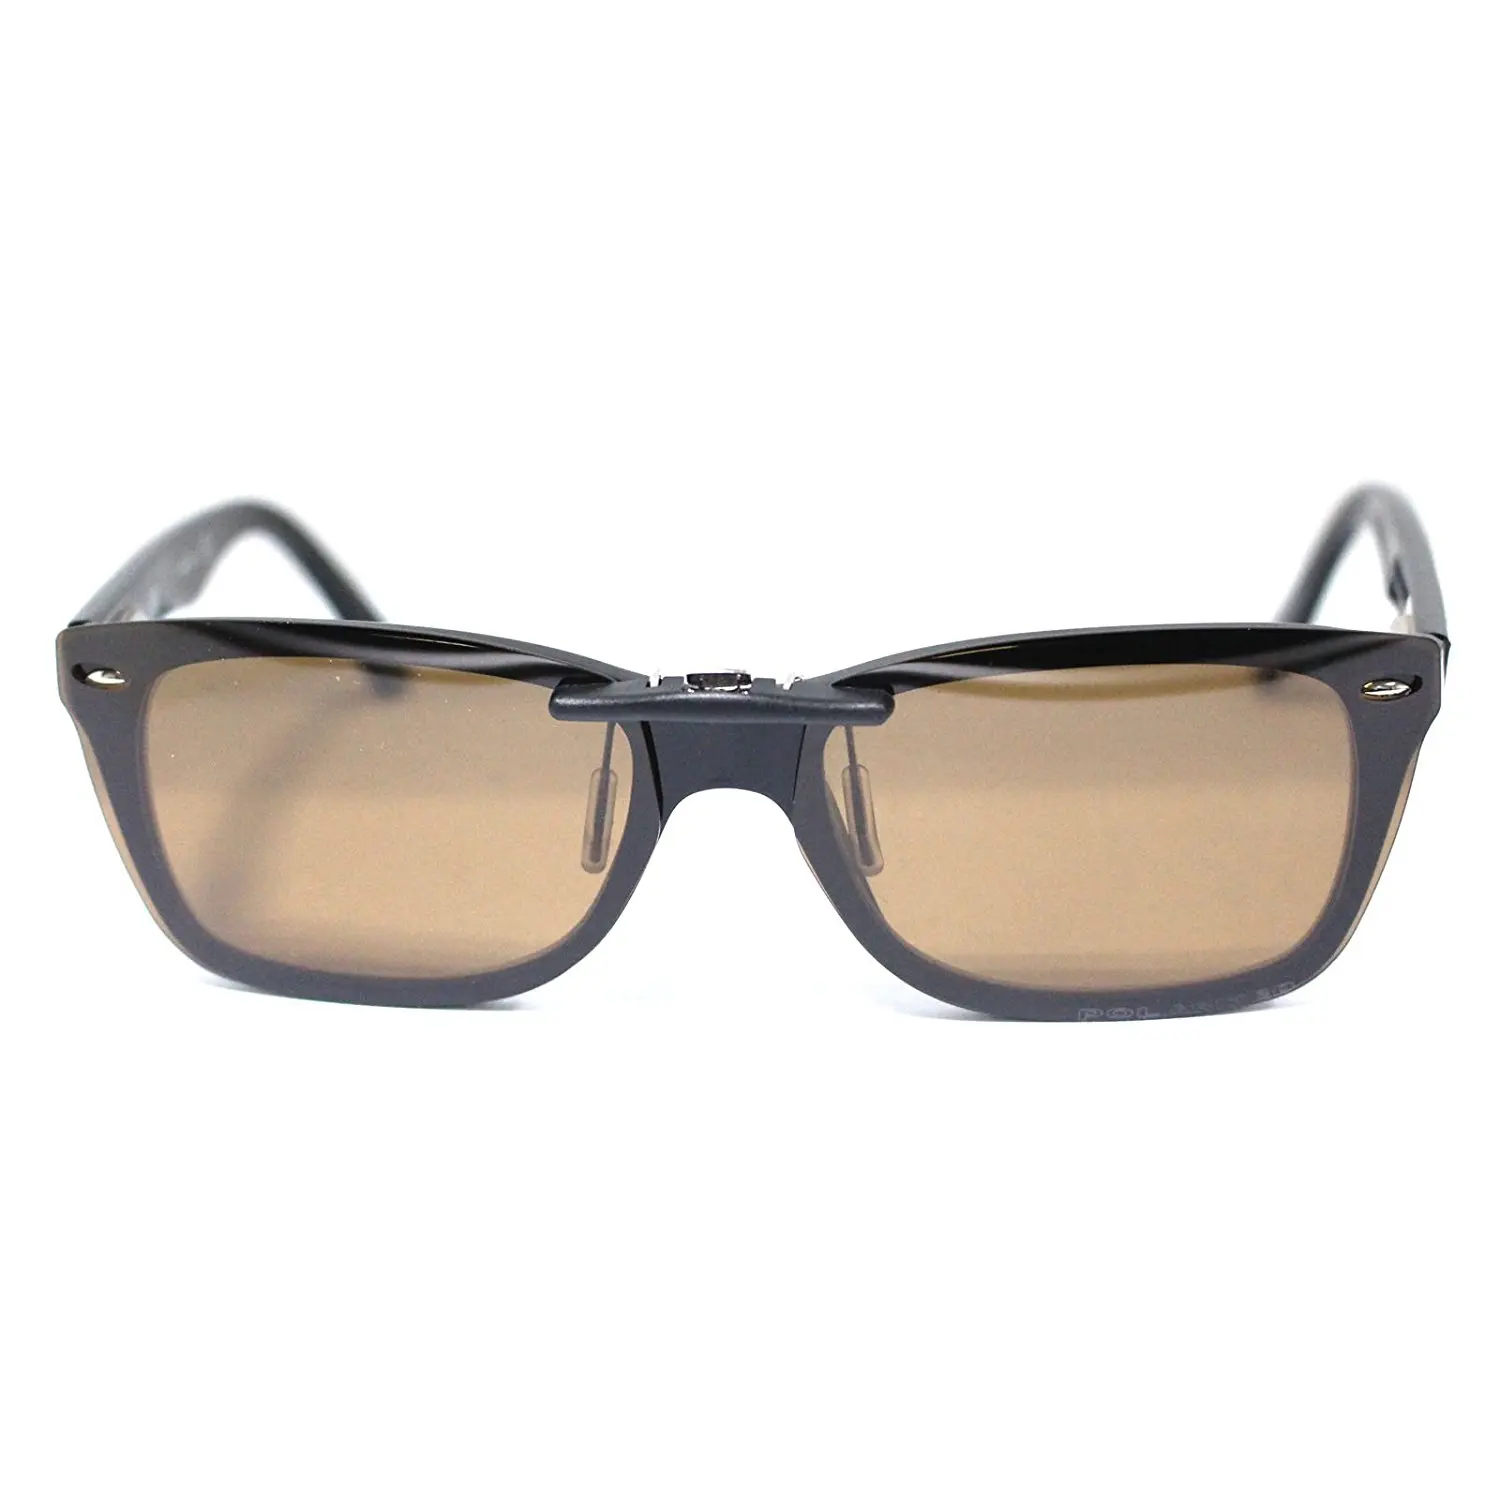 ray ban rx5228 clip on